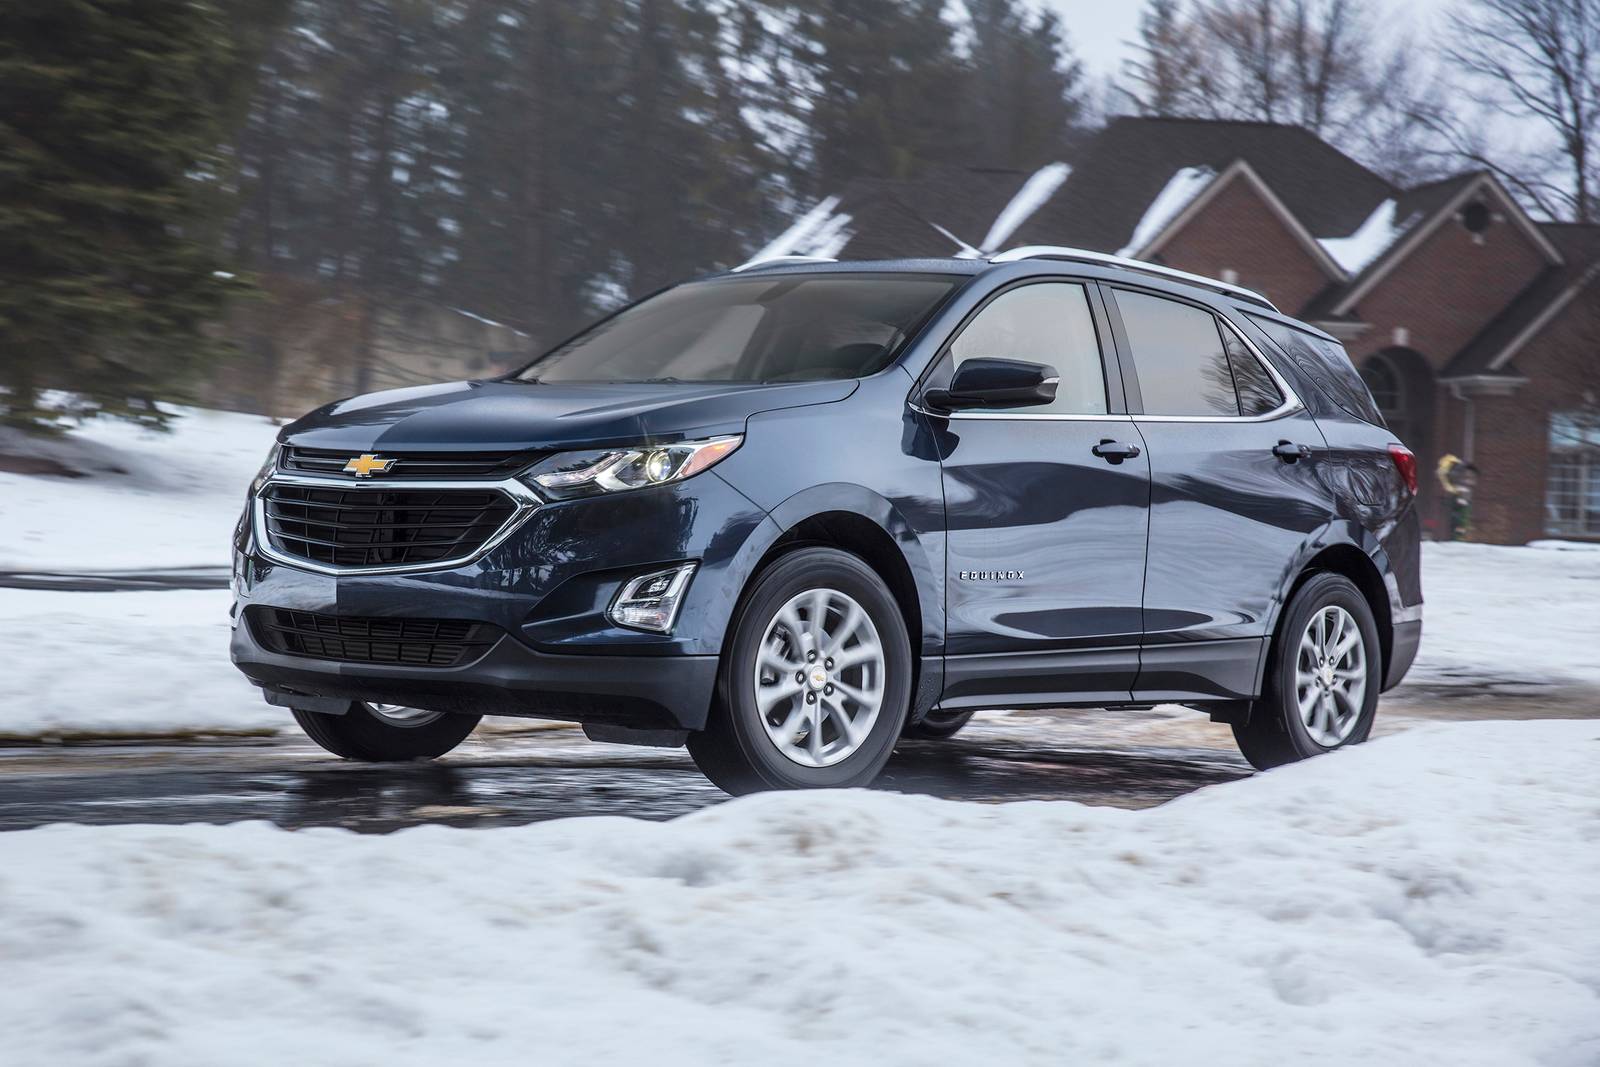 2018 Chevy Equinox Review & Ratings | Edmunds